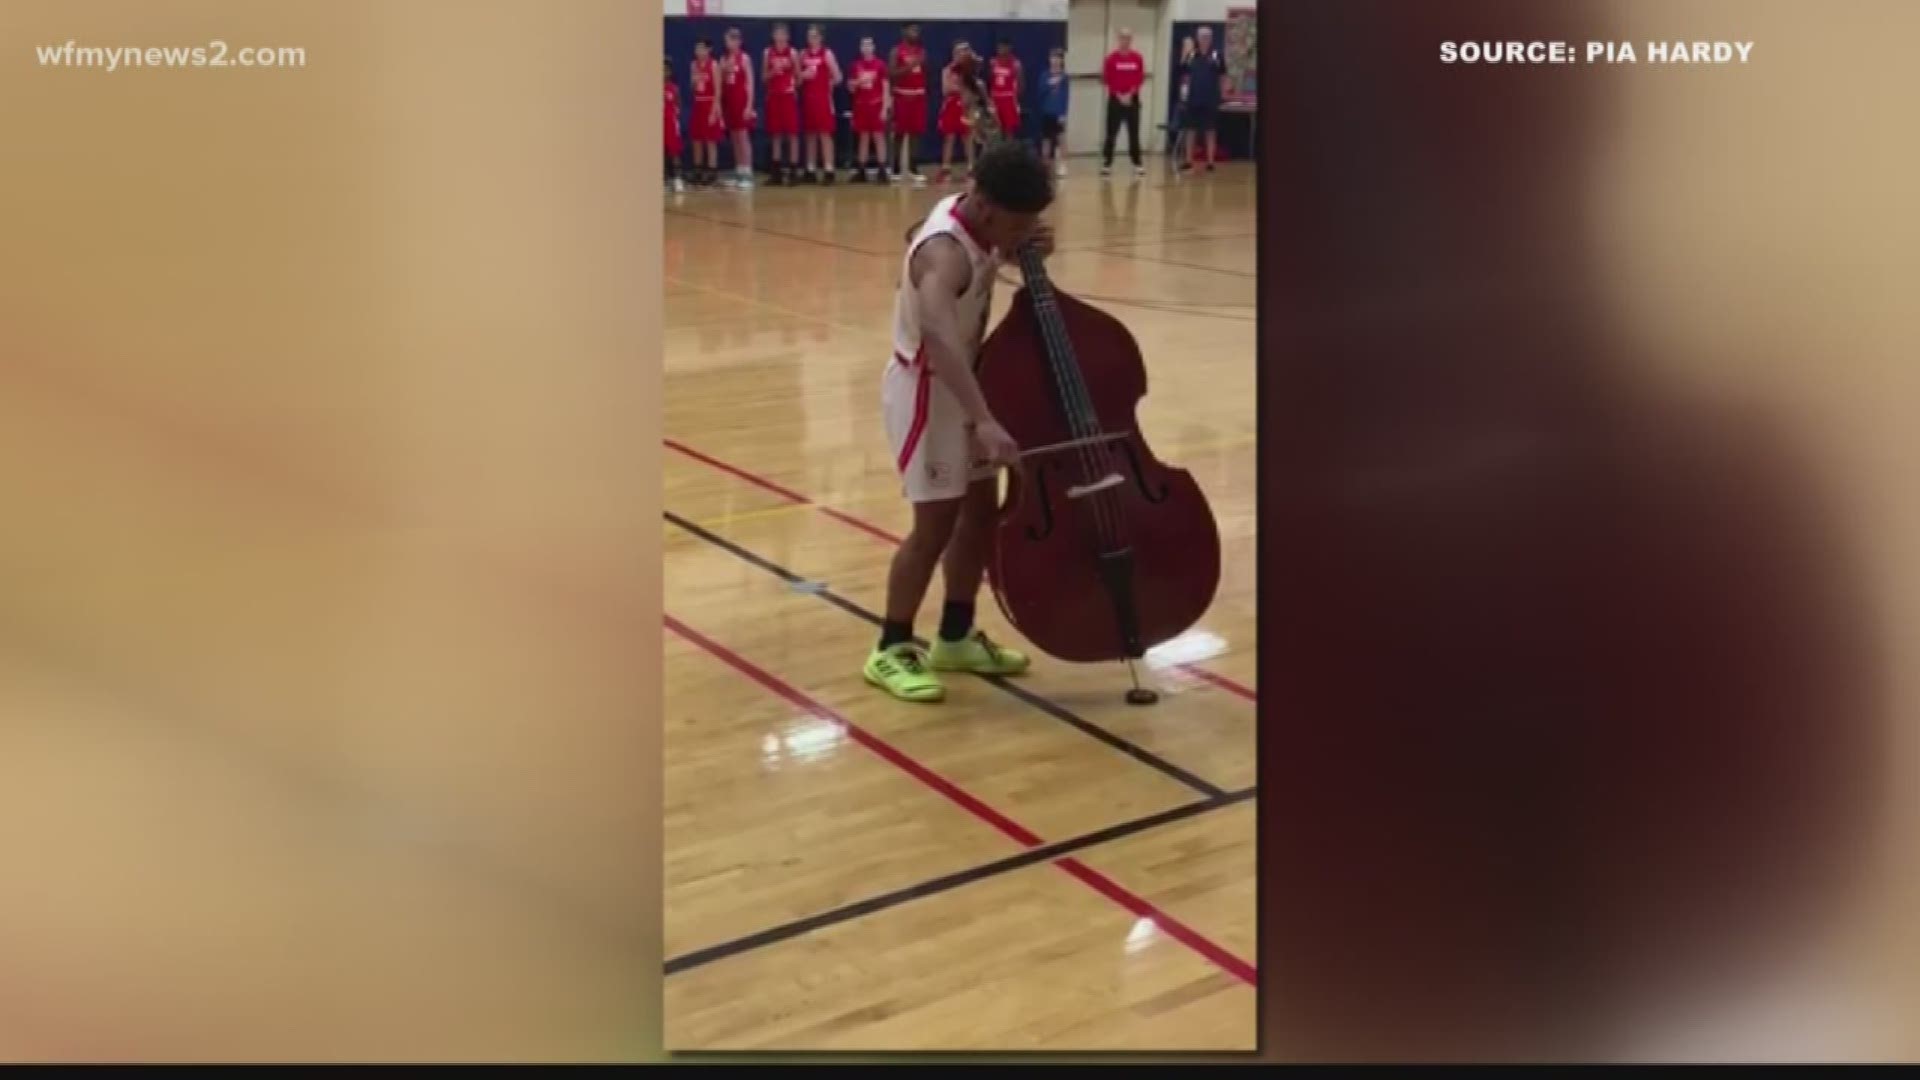 An 8th grade Clemmons Middle School basketball player shocks a crowded gym with his bass-playing abilities.